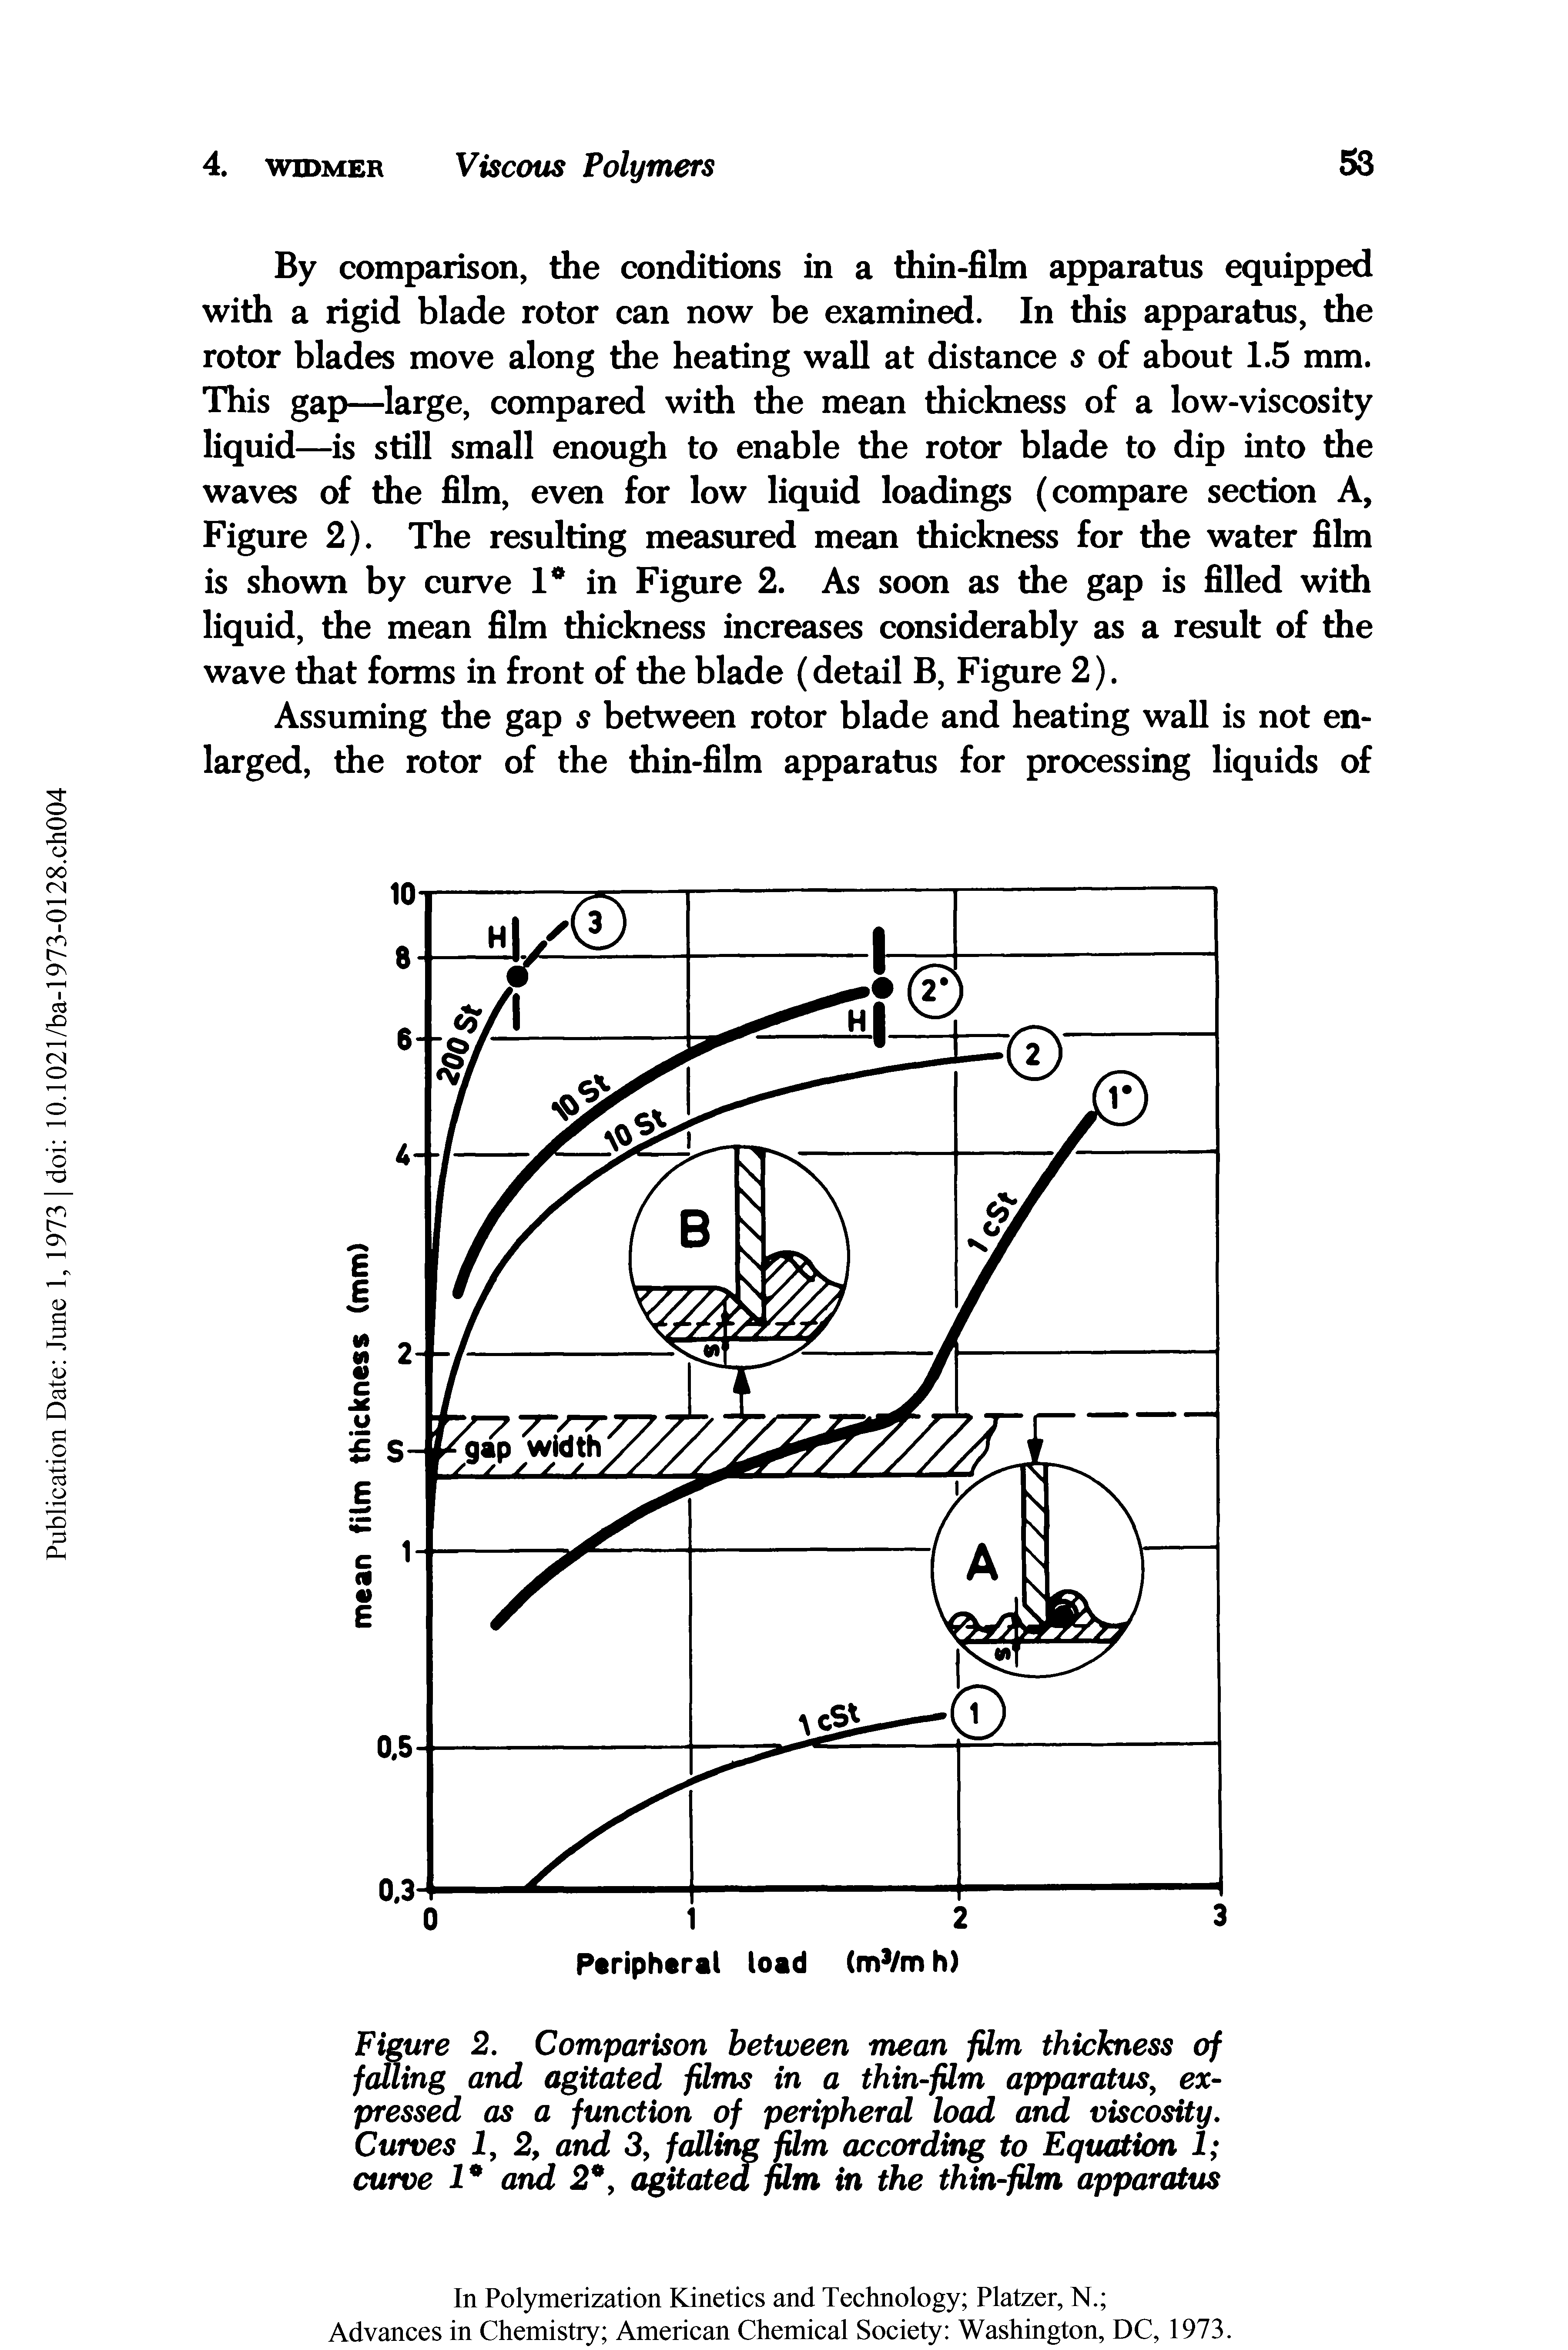 Figure 2. Comparison between mean film thickness of falling and agitated films in a thin-film apparatus, expressed as a function of peripheral load and viscosity. Curves I, 2, and 3, falling film according to Equation 1 curve 1° and 2°, agitated film in the thin-film apparatus...